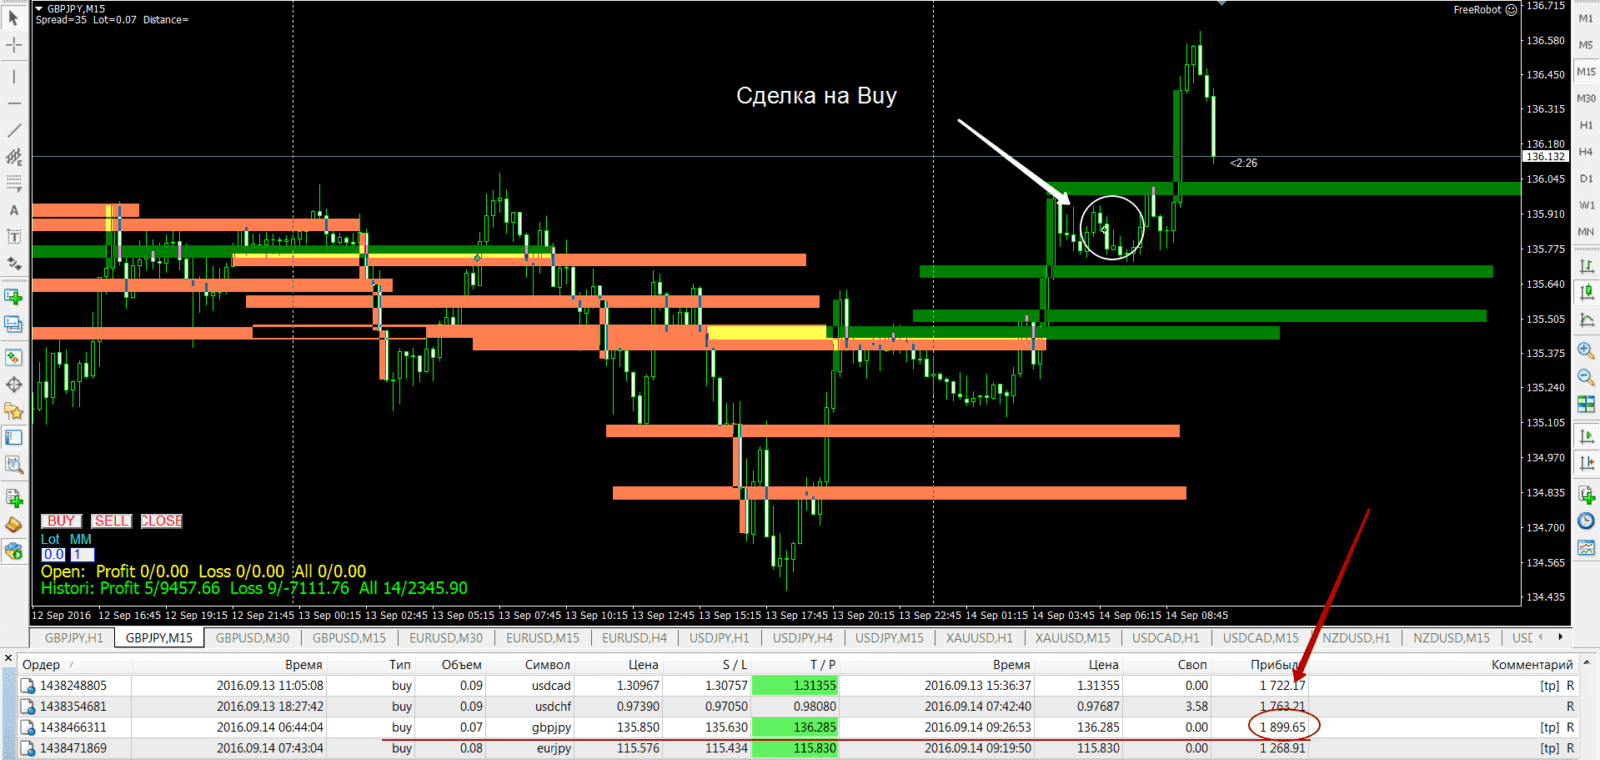 Buy deal on GBP/JPY closed in plus